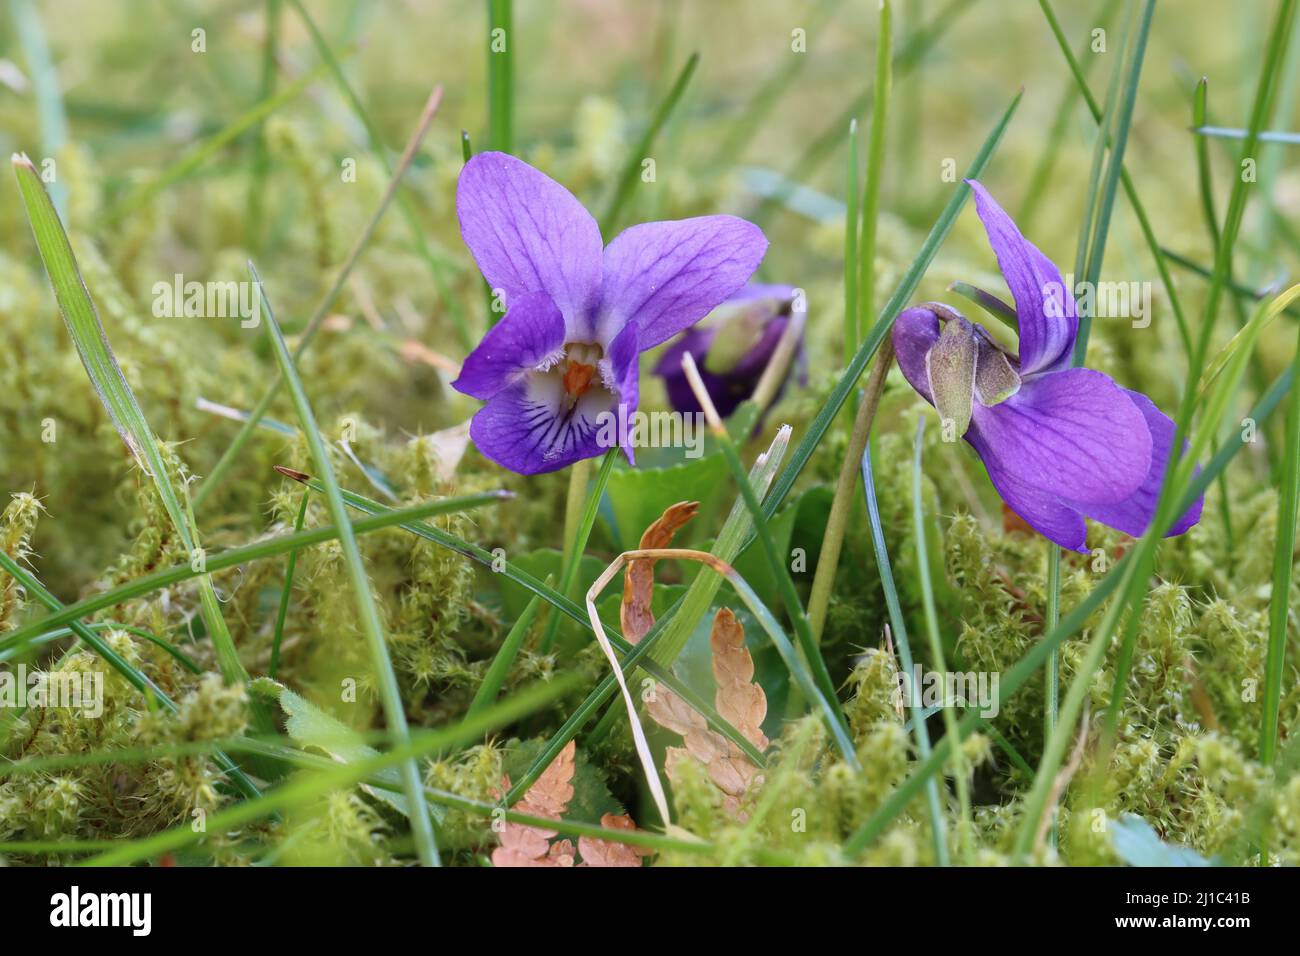 close-up of two pretty filigree violets growing in a lawn Stock Photo